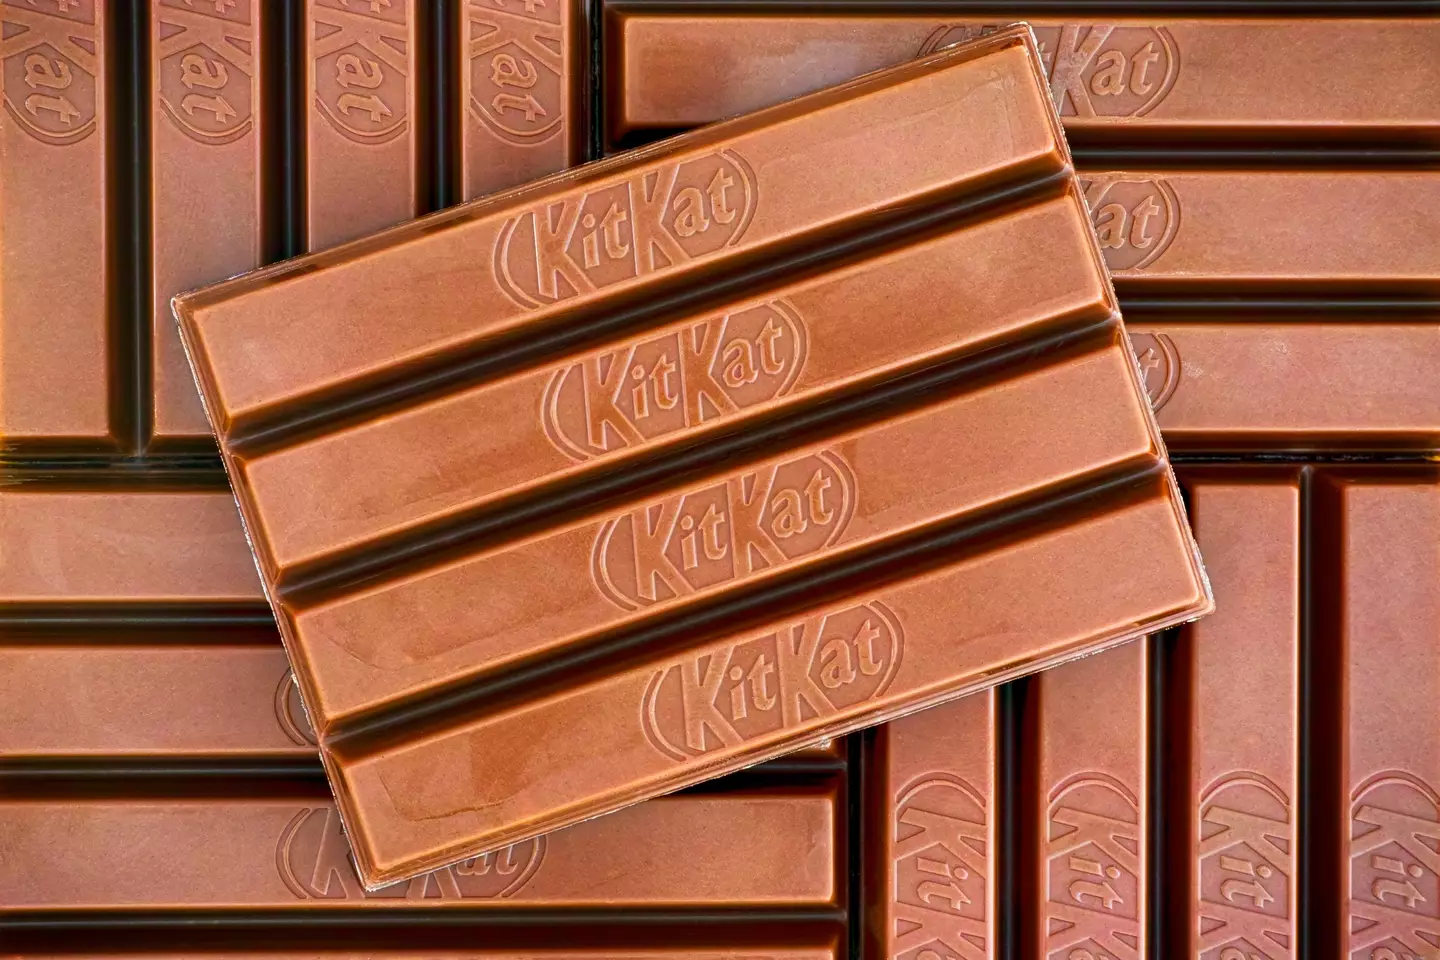 KitKat's should be enjoyed while you relax (